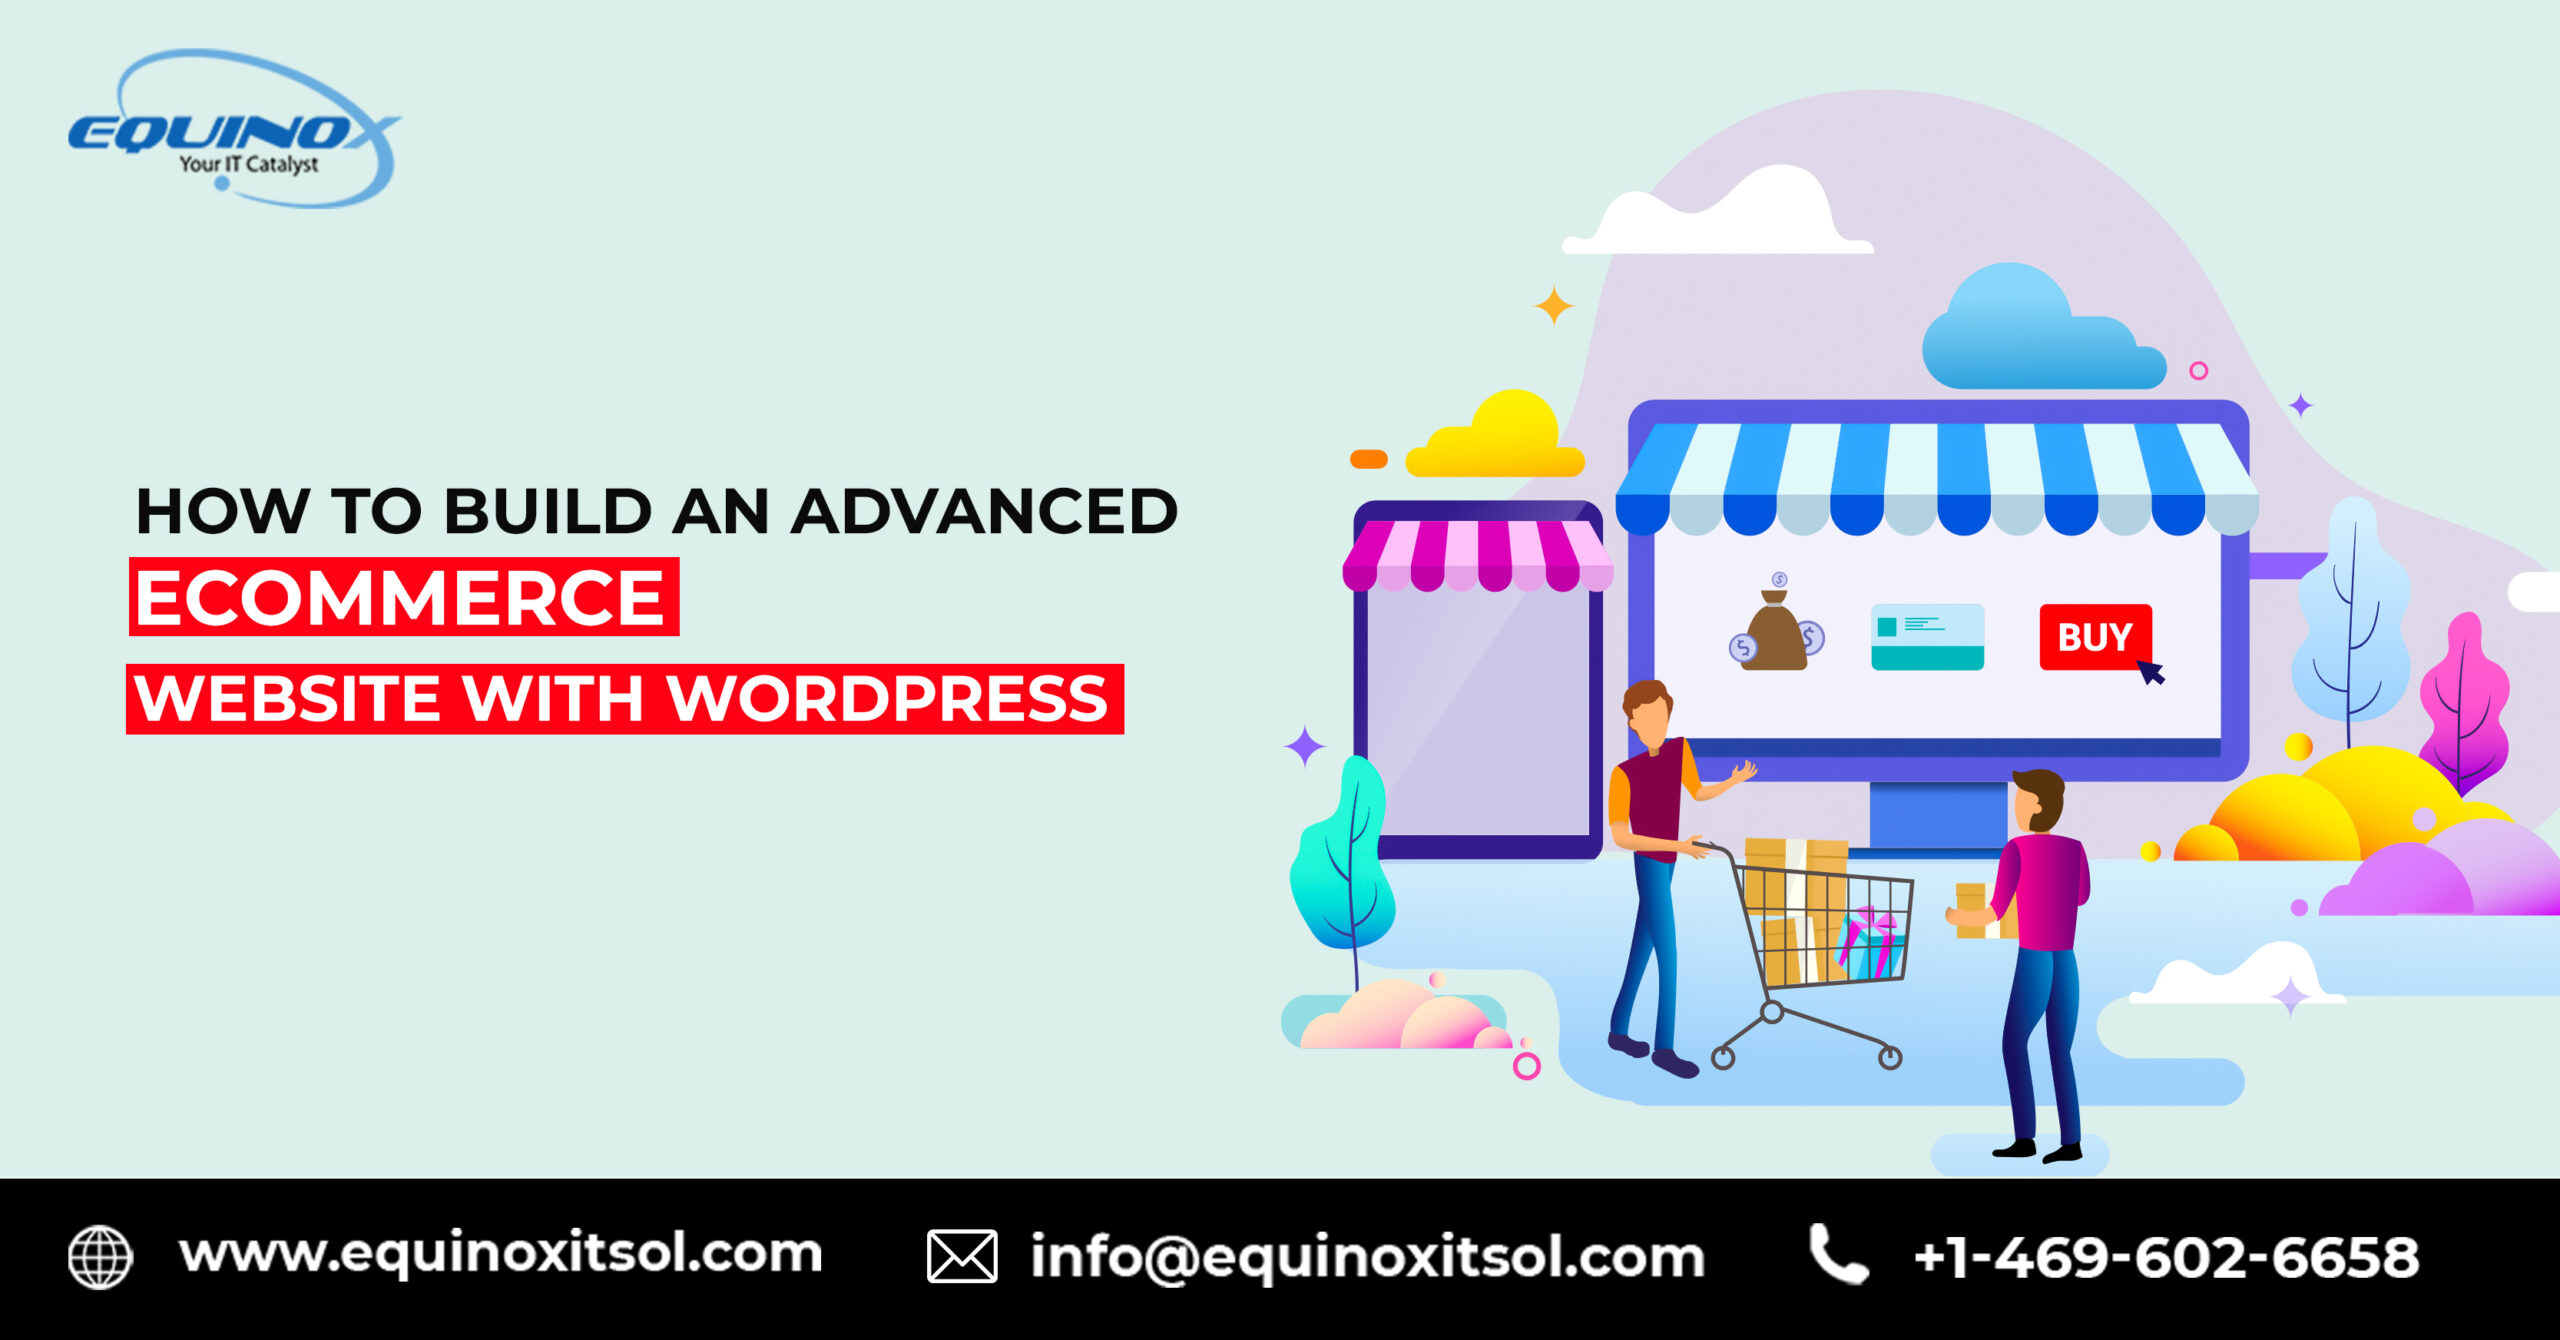 How to build an advanced eCommerce website with WordPress